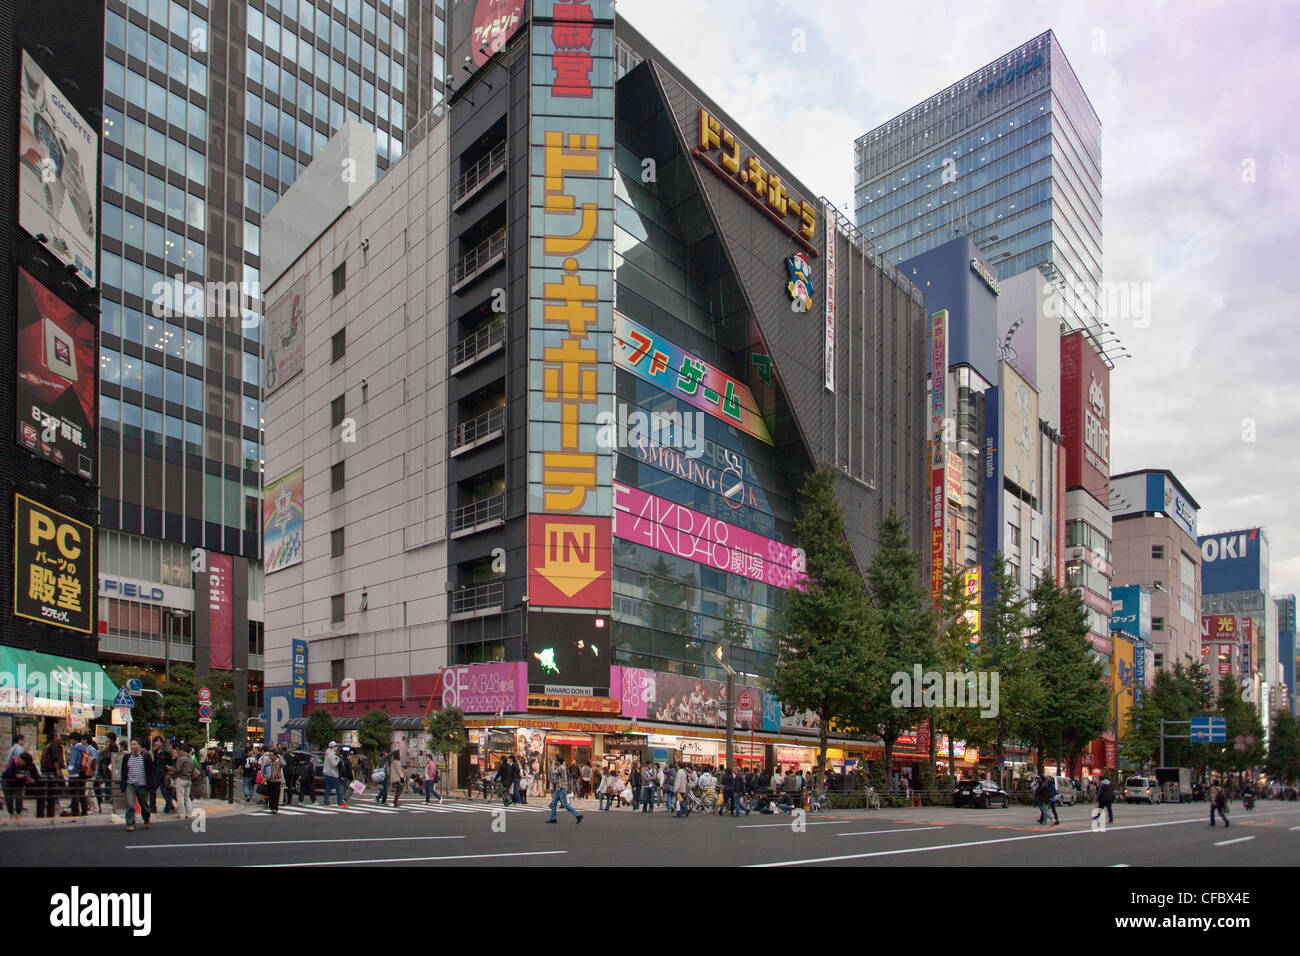 Japan, Asia, Tokyo, city, Akihabara, Electric Town, architecture, bright, colourful, electric, modern, new, shopping center, sho Stock Photo